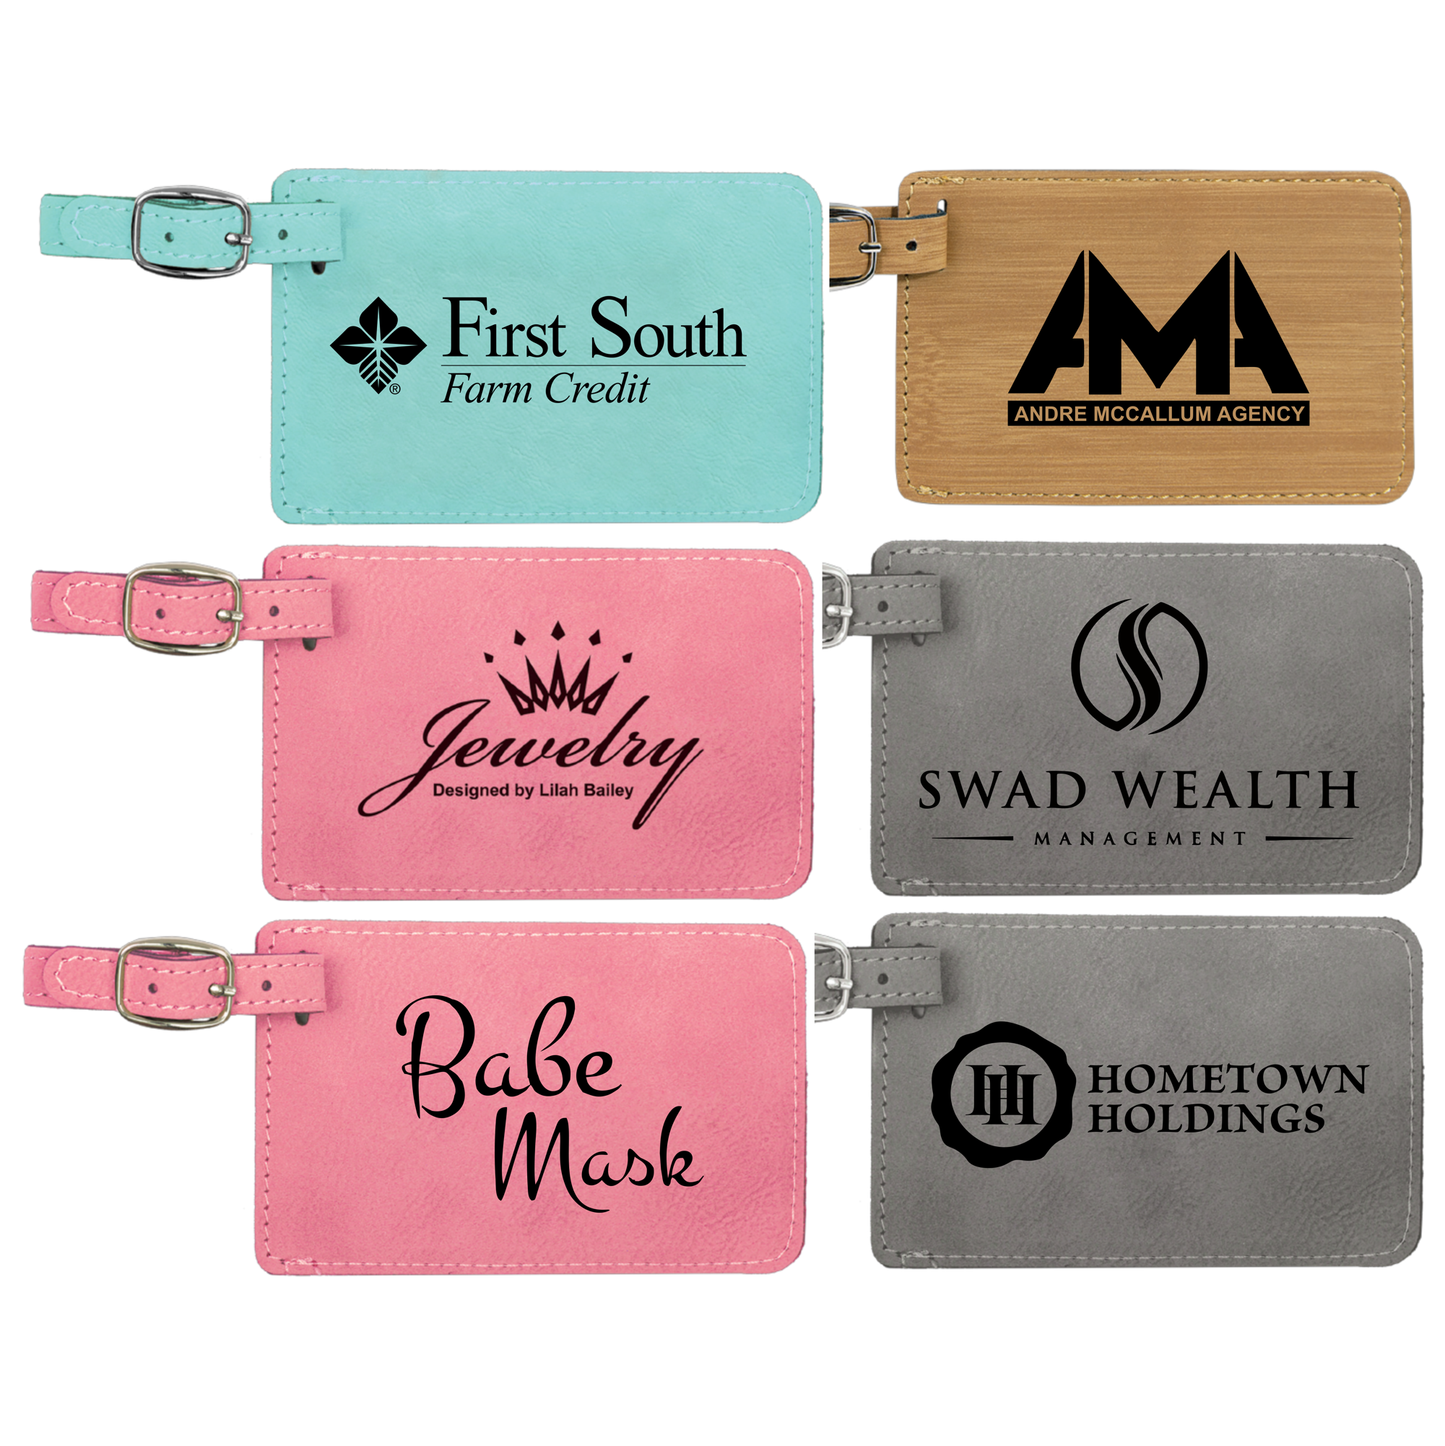 Engraved Leather Luggage Tags – Crystal Images, Inc.